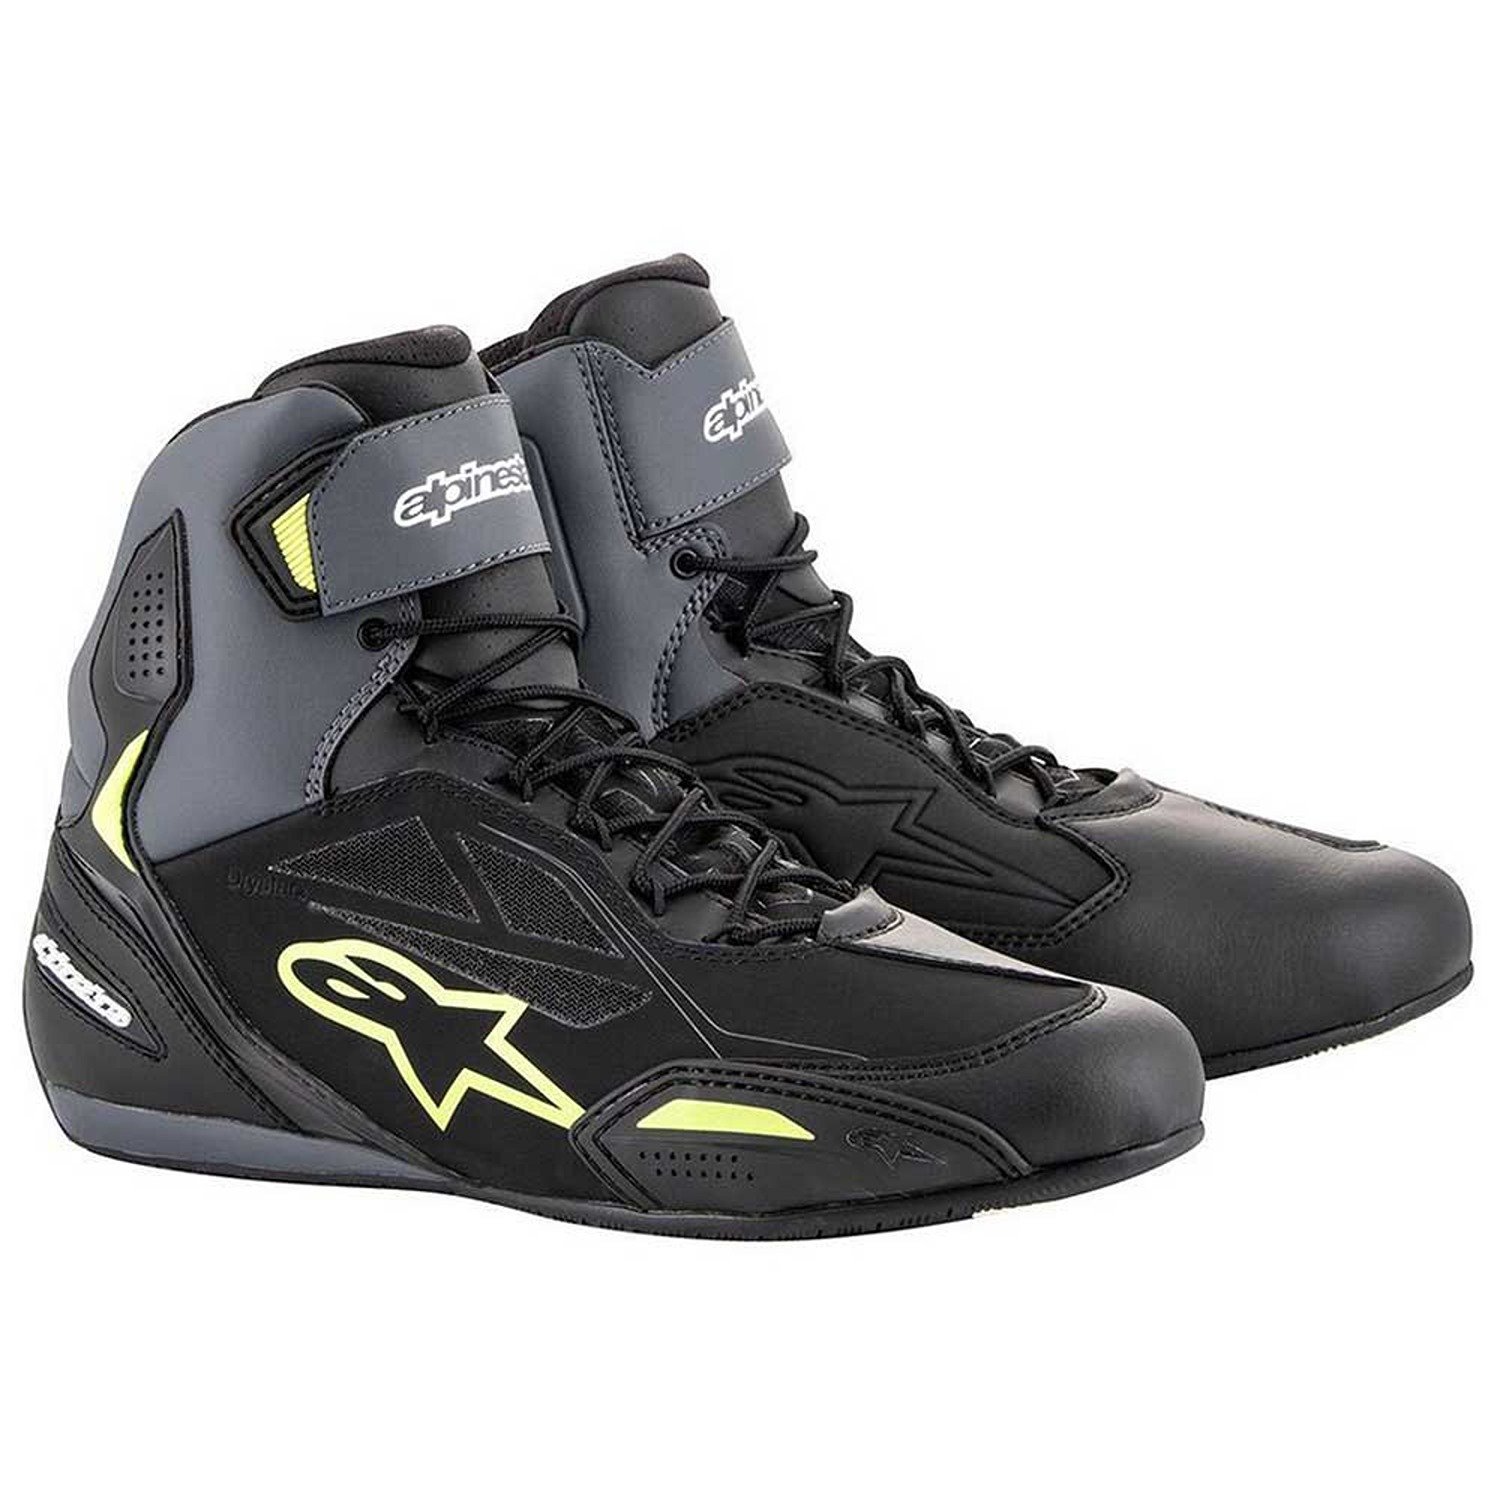 Image of Alpinestars Faster-3 Shoes Black Yellow Fluo Größe US 75